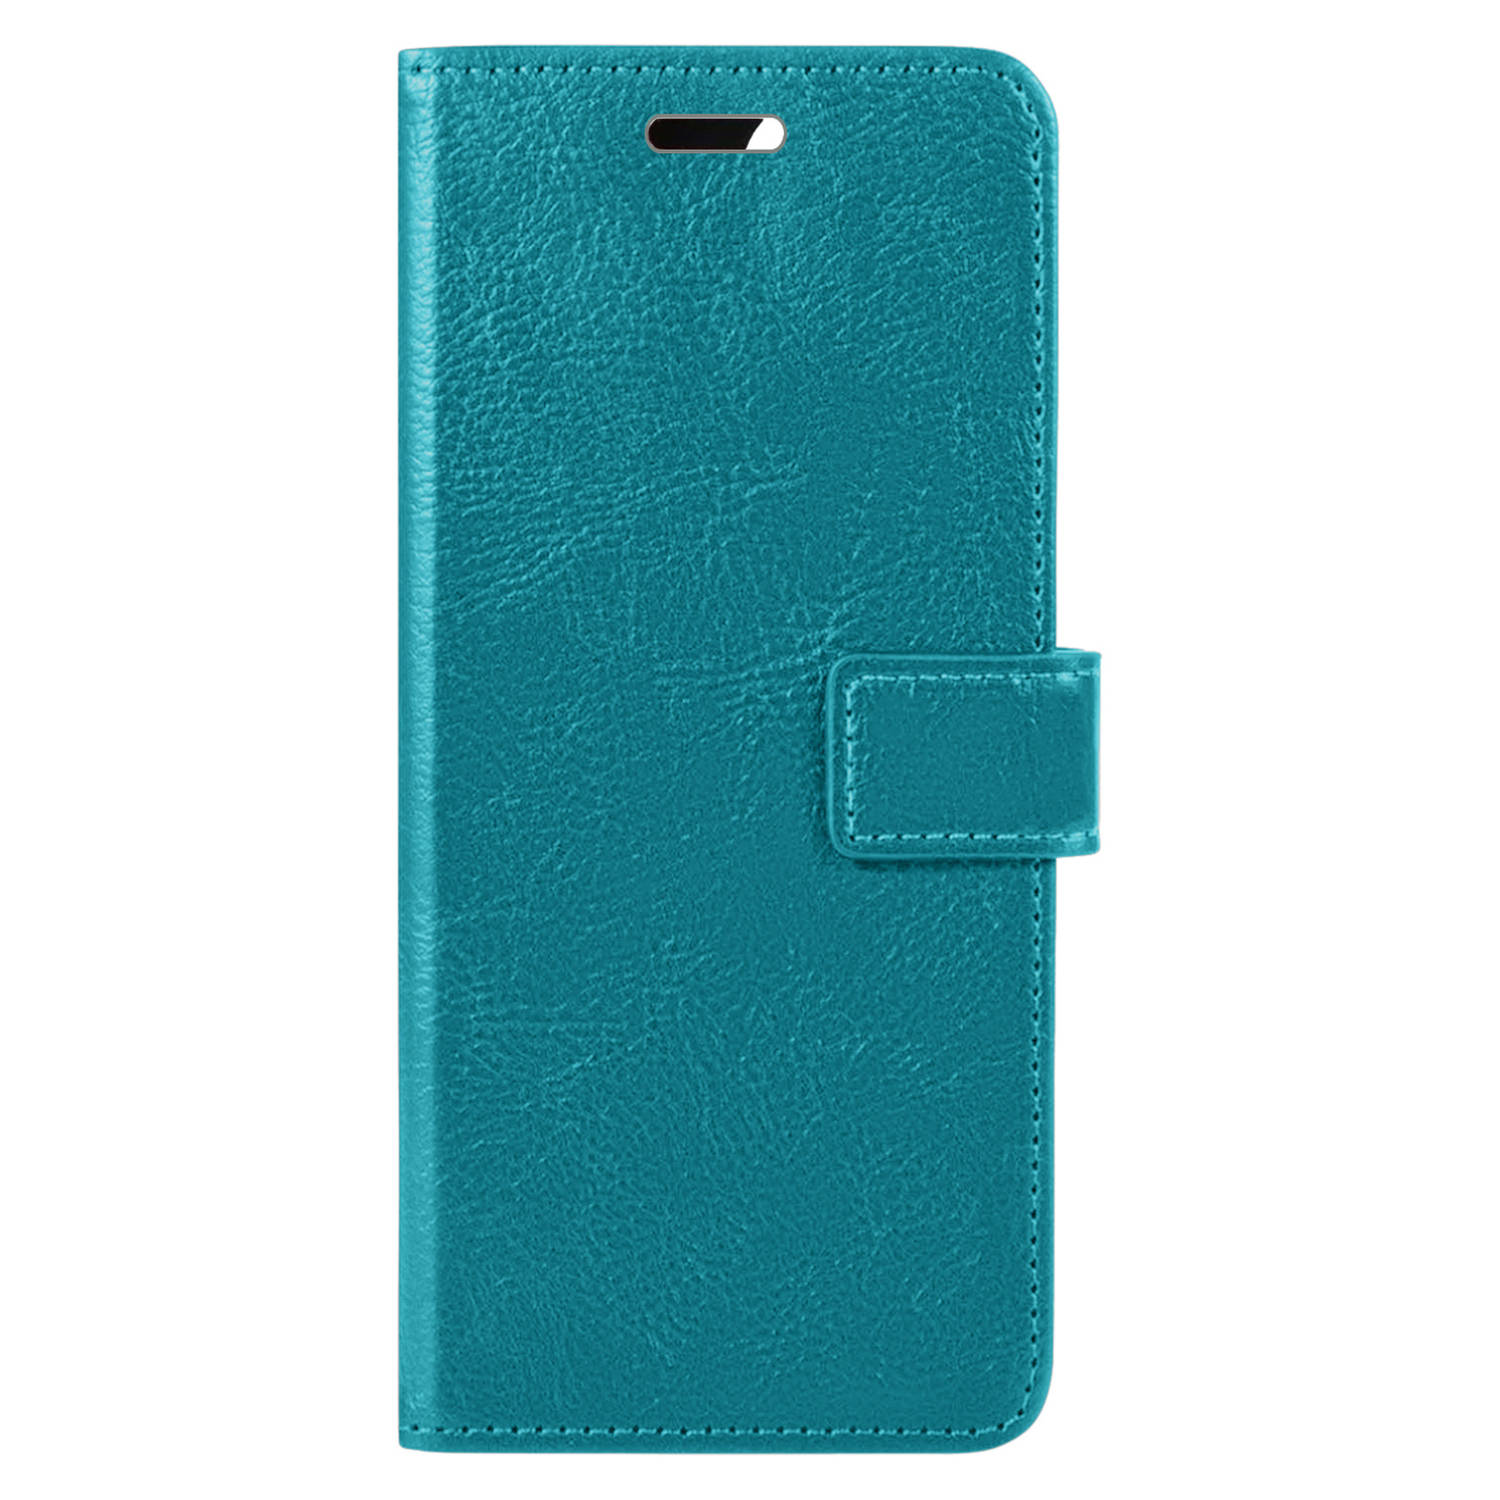 Samsung Galaxy A02s Hoesje Bookcase - Samsung Galaxy A02s Hoes Flip Case Book Cover - Samsung Galaxy A02s Hoes Book Case Turquoise